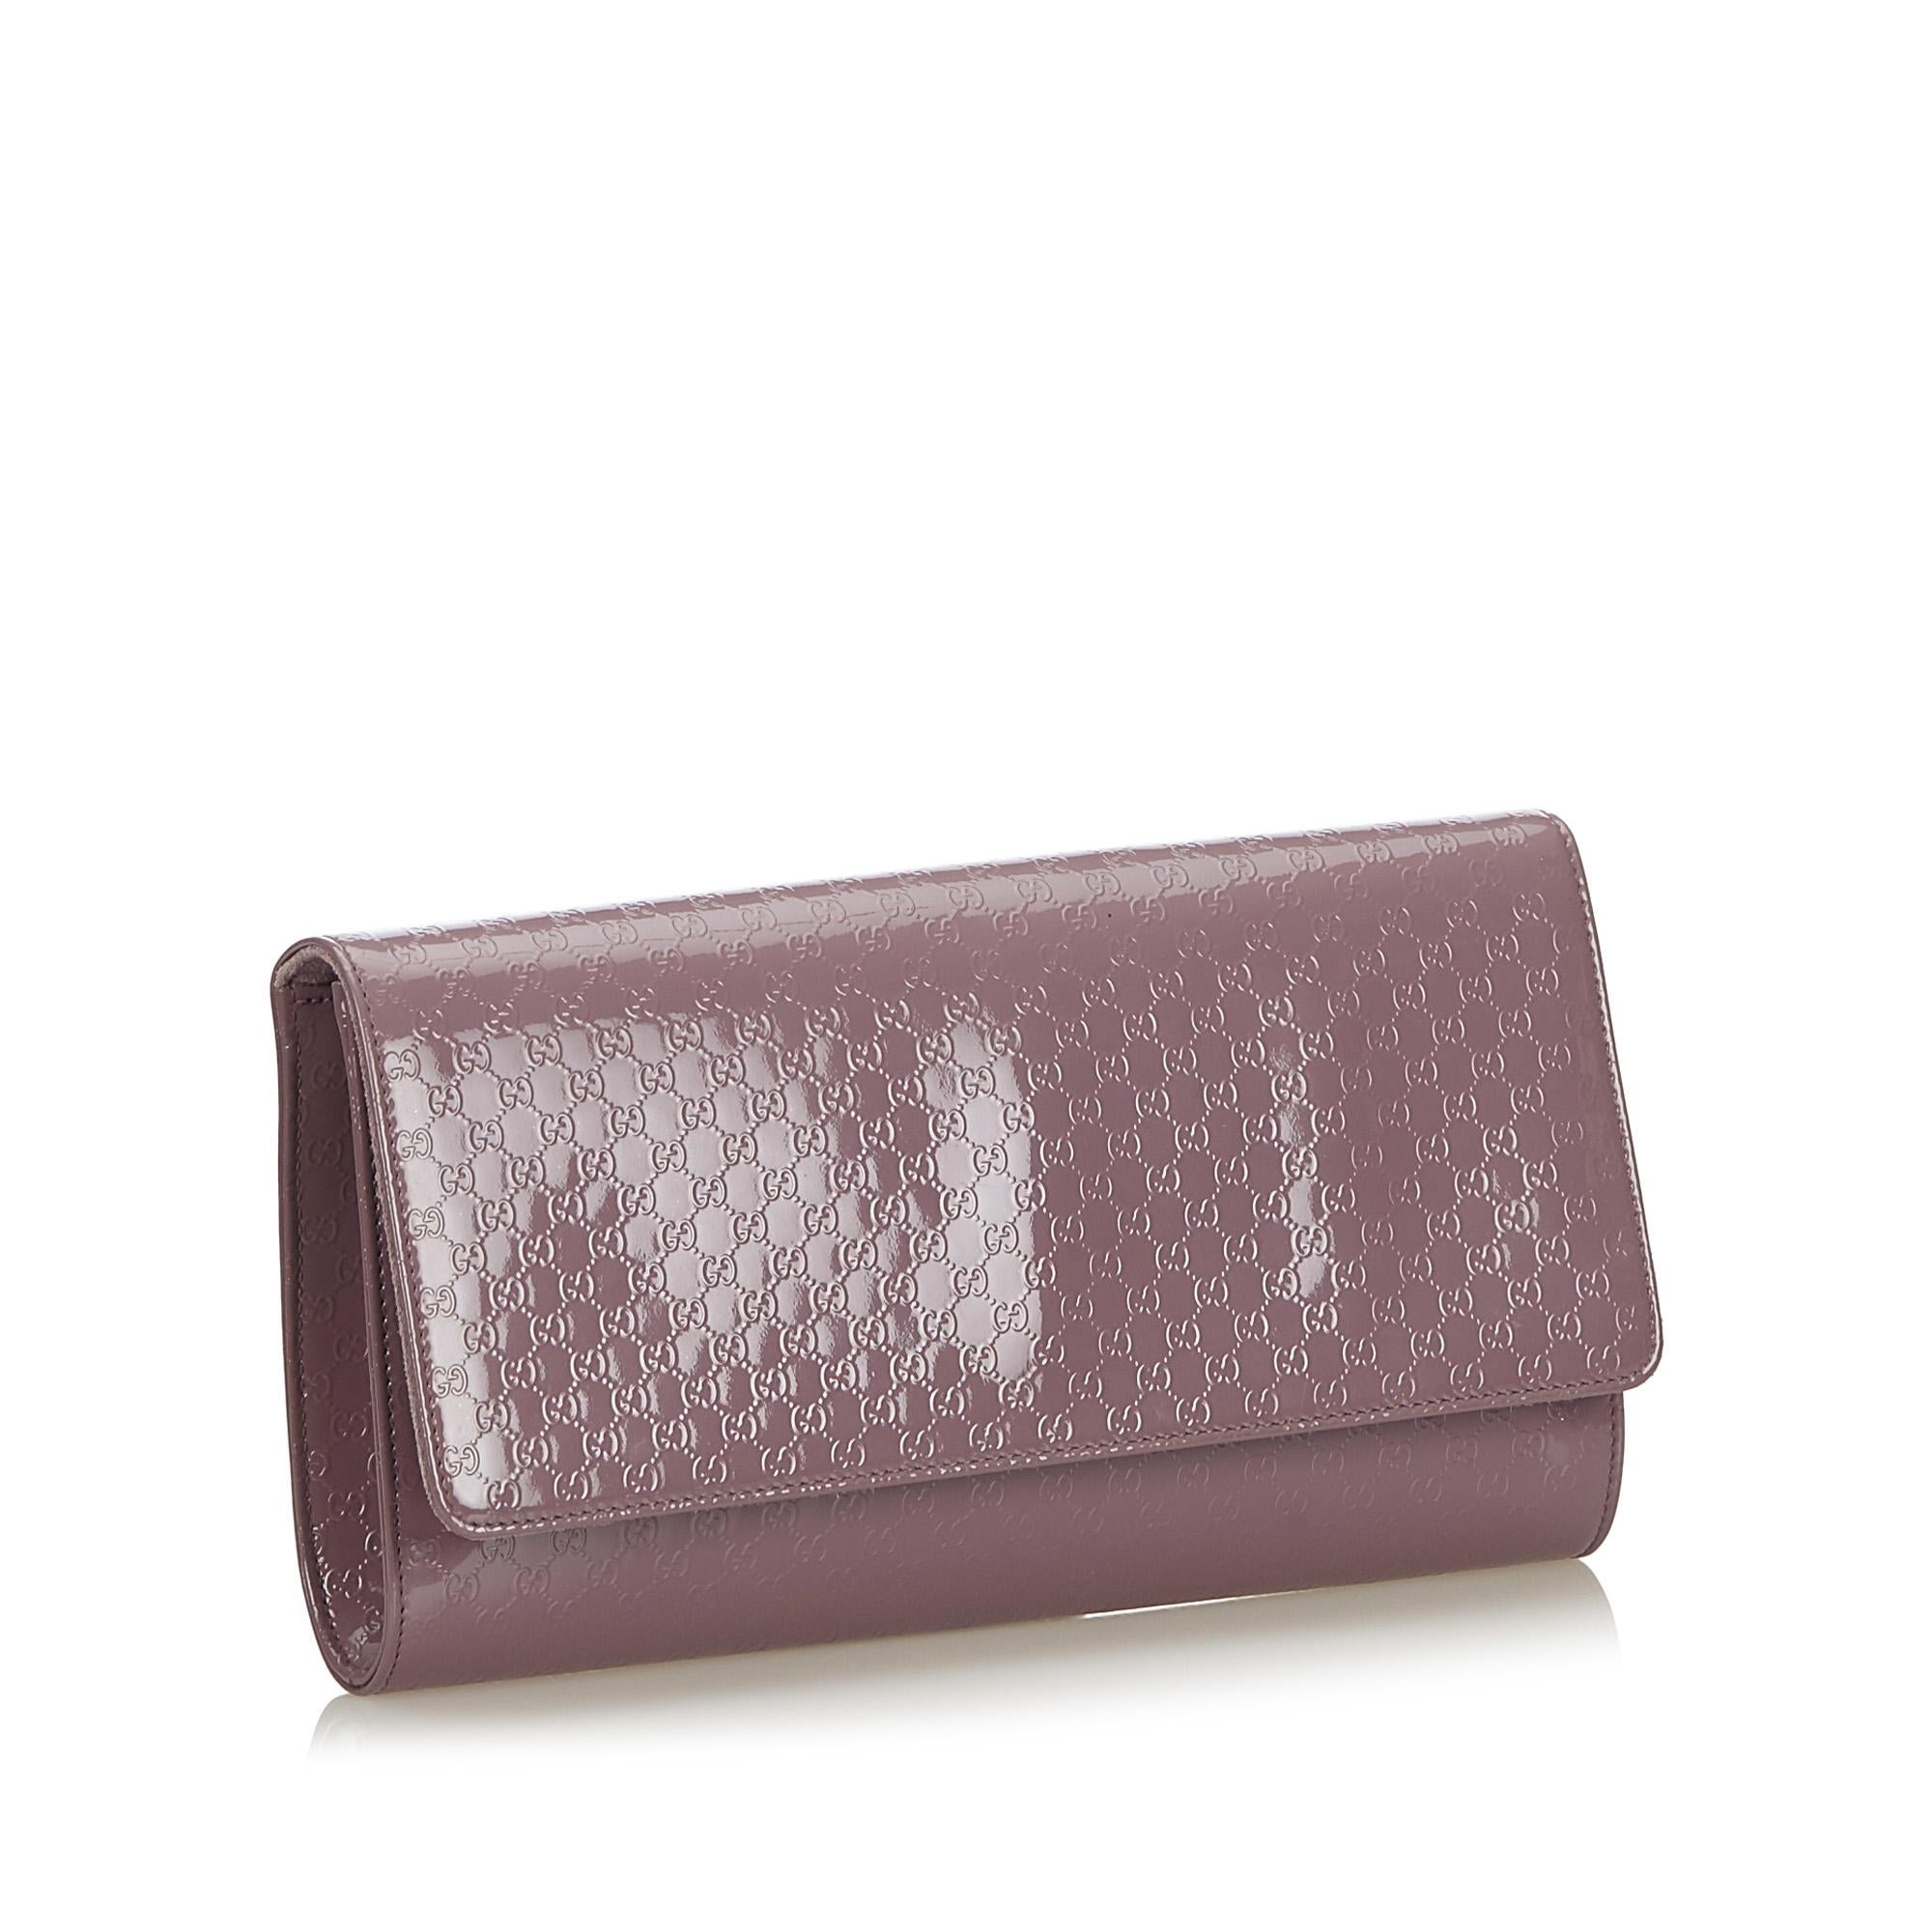 The Broadway clutch features a patent leather body, top flap with magnetic closure and an interior zip pocket. It carries as AB condition rating.

Inclusions: 
This item does not come with inclusions.

Dimensions:
Length: 16.00 cm
Width: 29.00